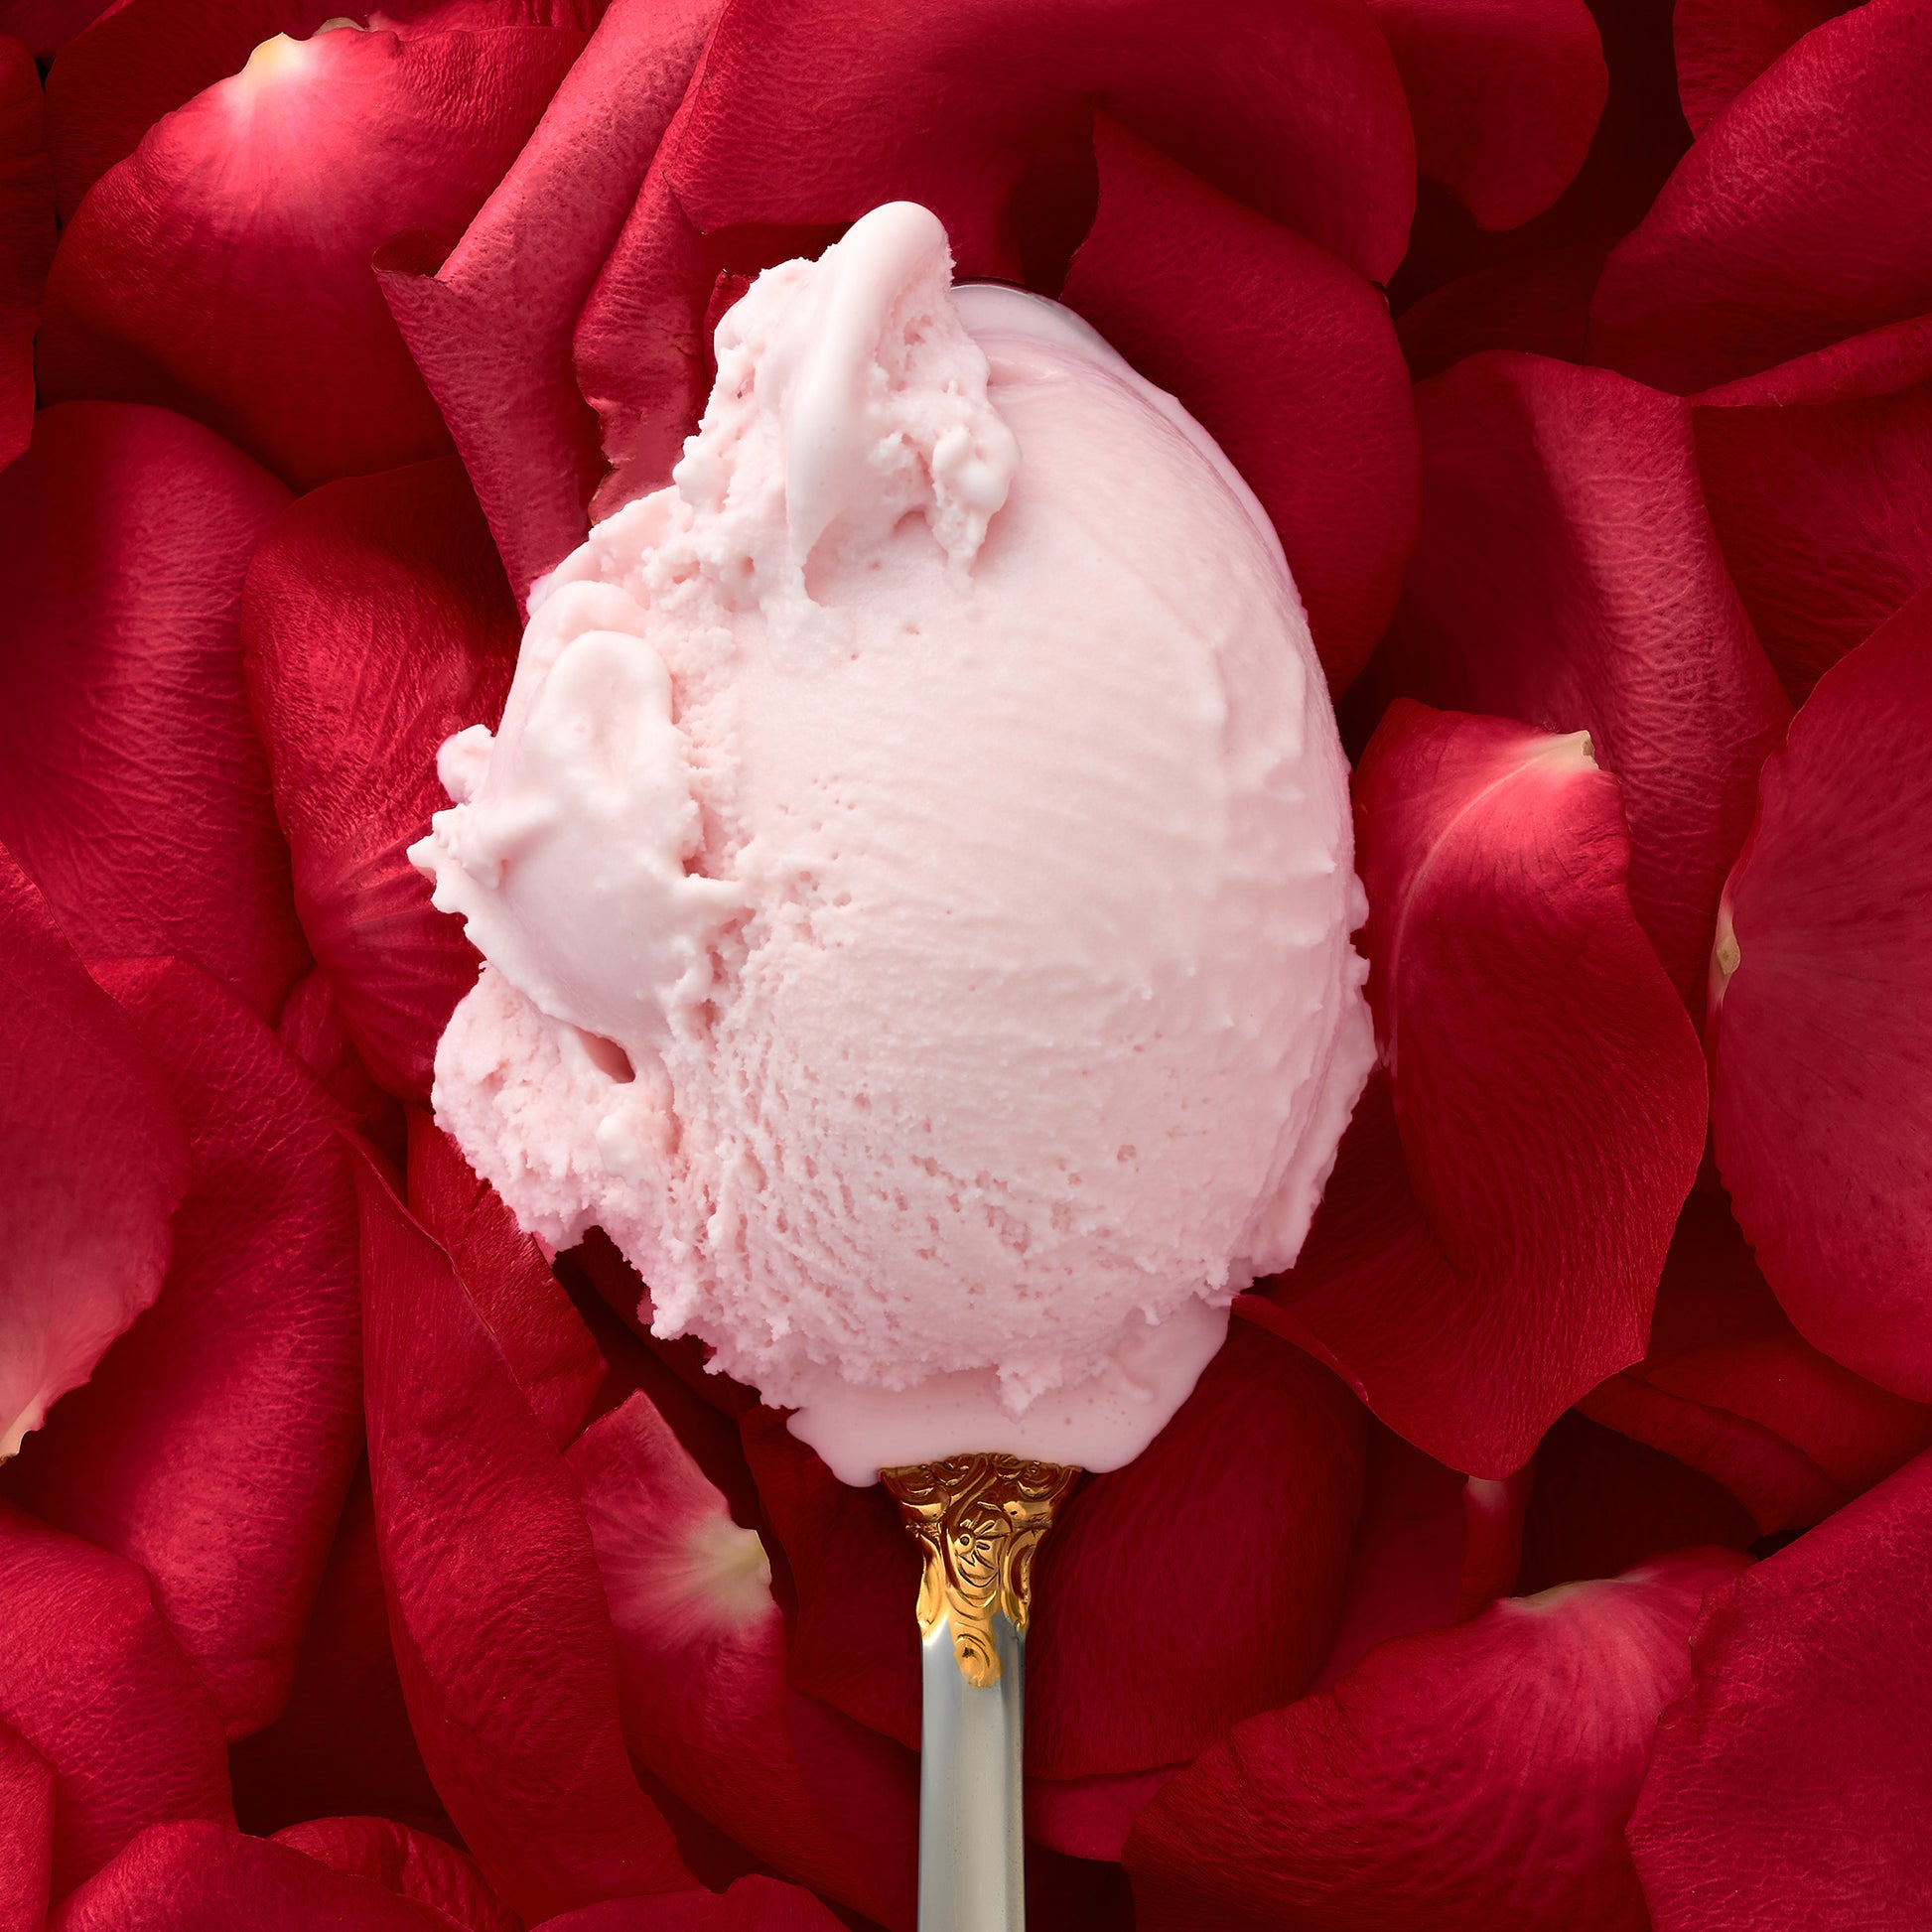 A closeup of Rosewater kulfi in a decorative spoon, with a soft focus backdrop of scattered rose petals.